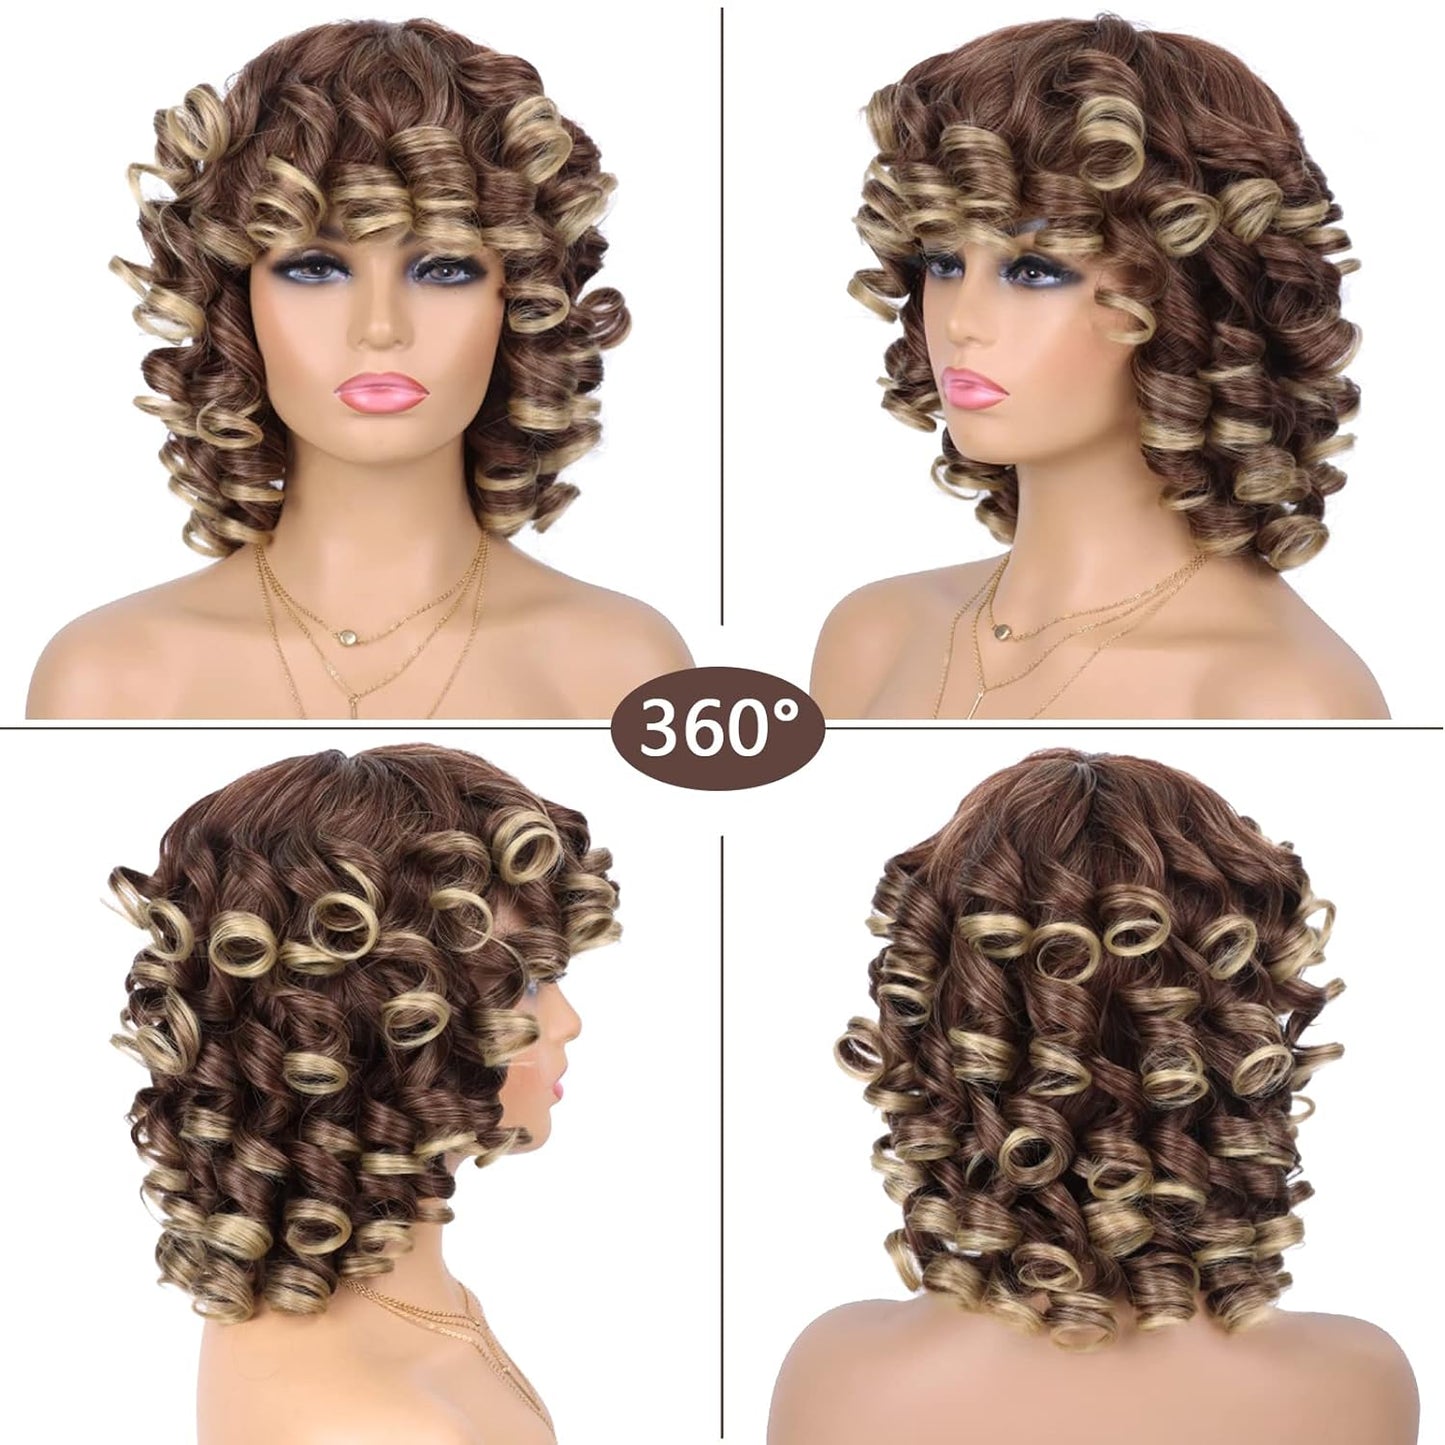 Grey Curly Wig with Bangs.Glueless Wear and Go Wig Afro Curly Synthetic Wigs Ombre Color Heat Resistant Short Curly Wigs Natural Looking Hair for Daily Party Use (1B/Grey)